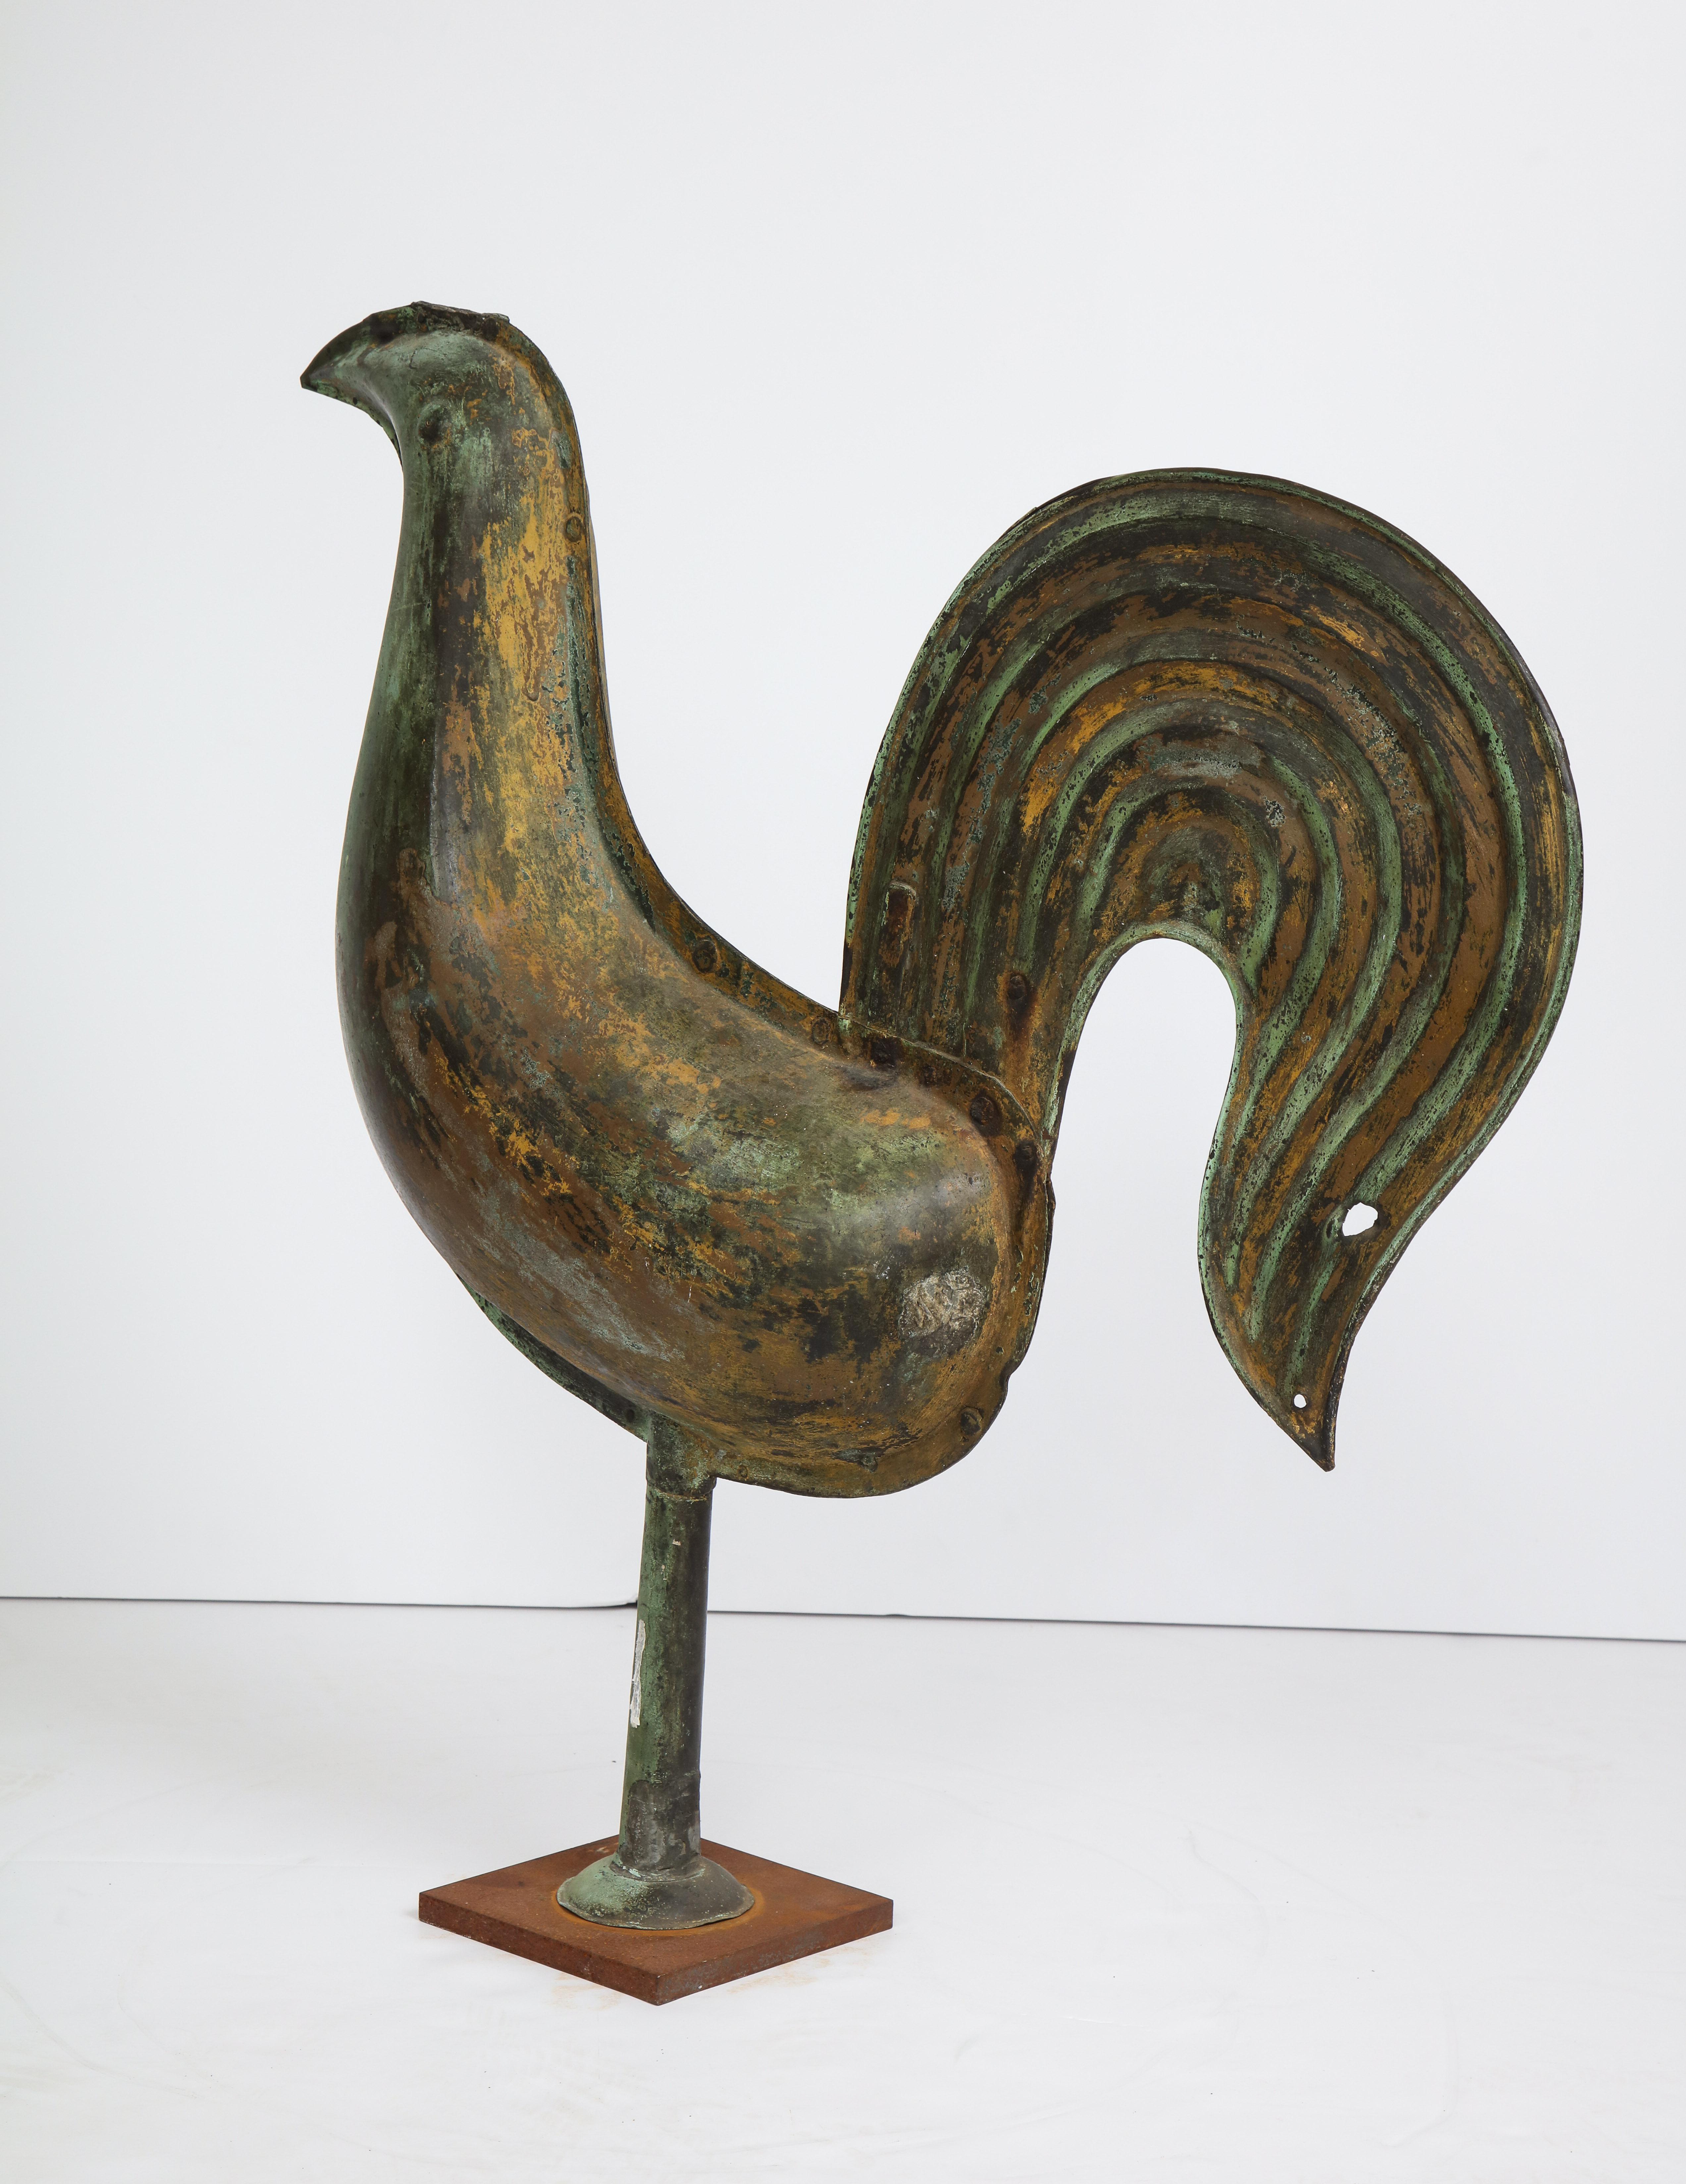 Mounted on contemporary base. Chantecleer is French for rooster and rooster weathervanes have been featured prominently throughout French history appearing on church steeples and towers for well over 1000 years.